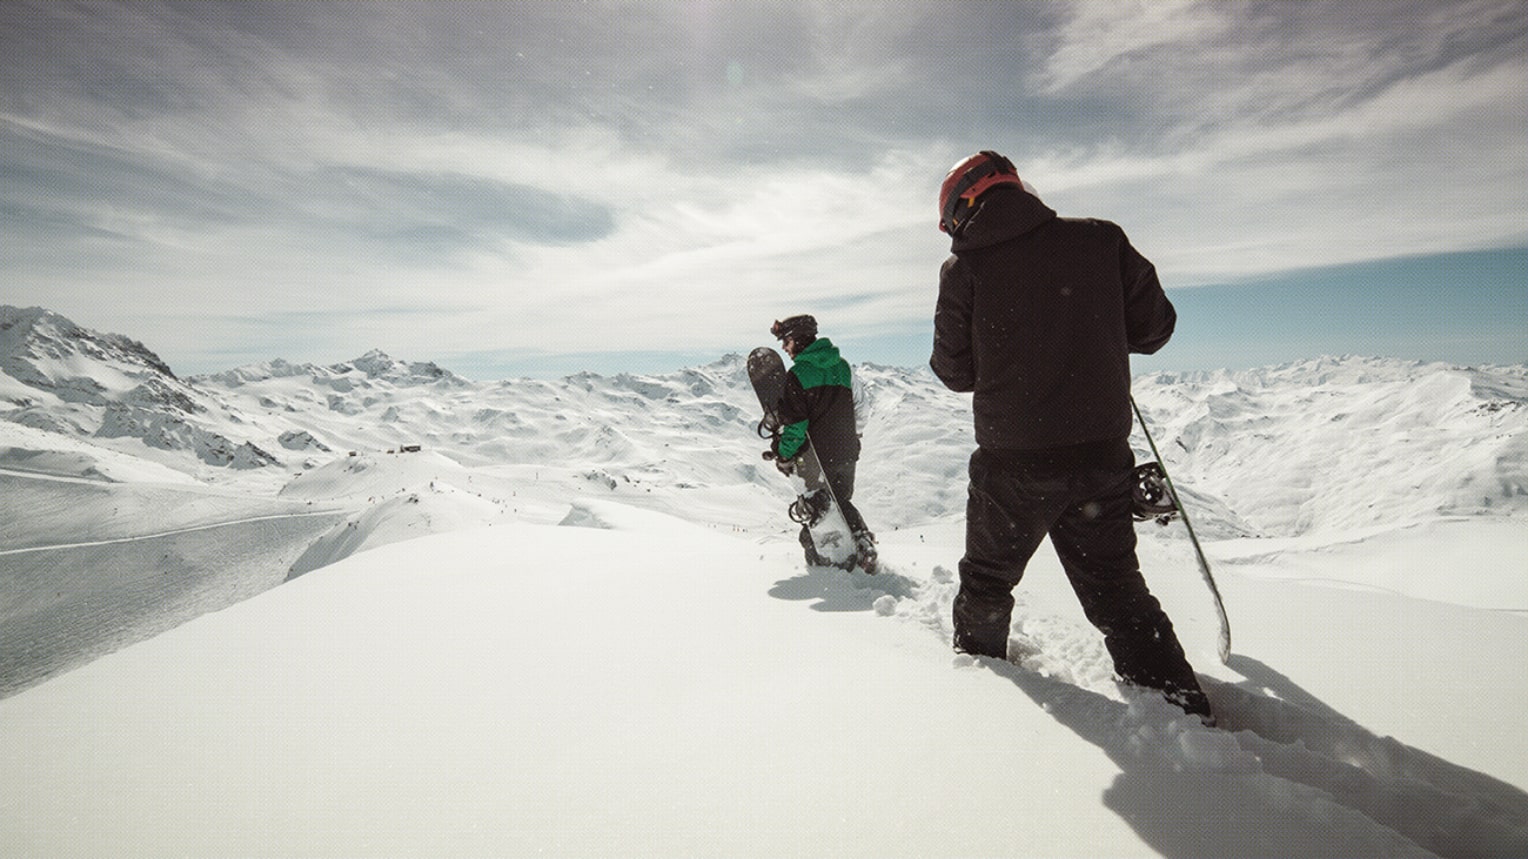 Snowboarders on Snowy Hill